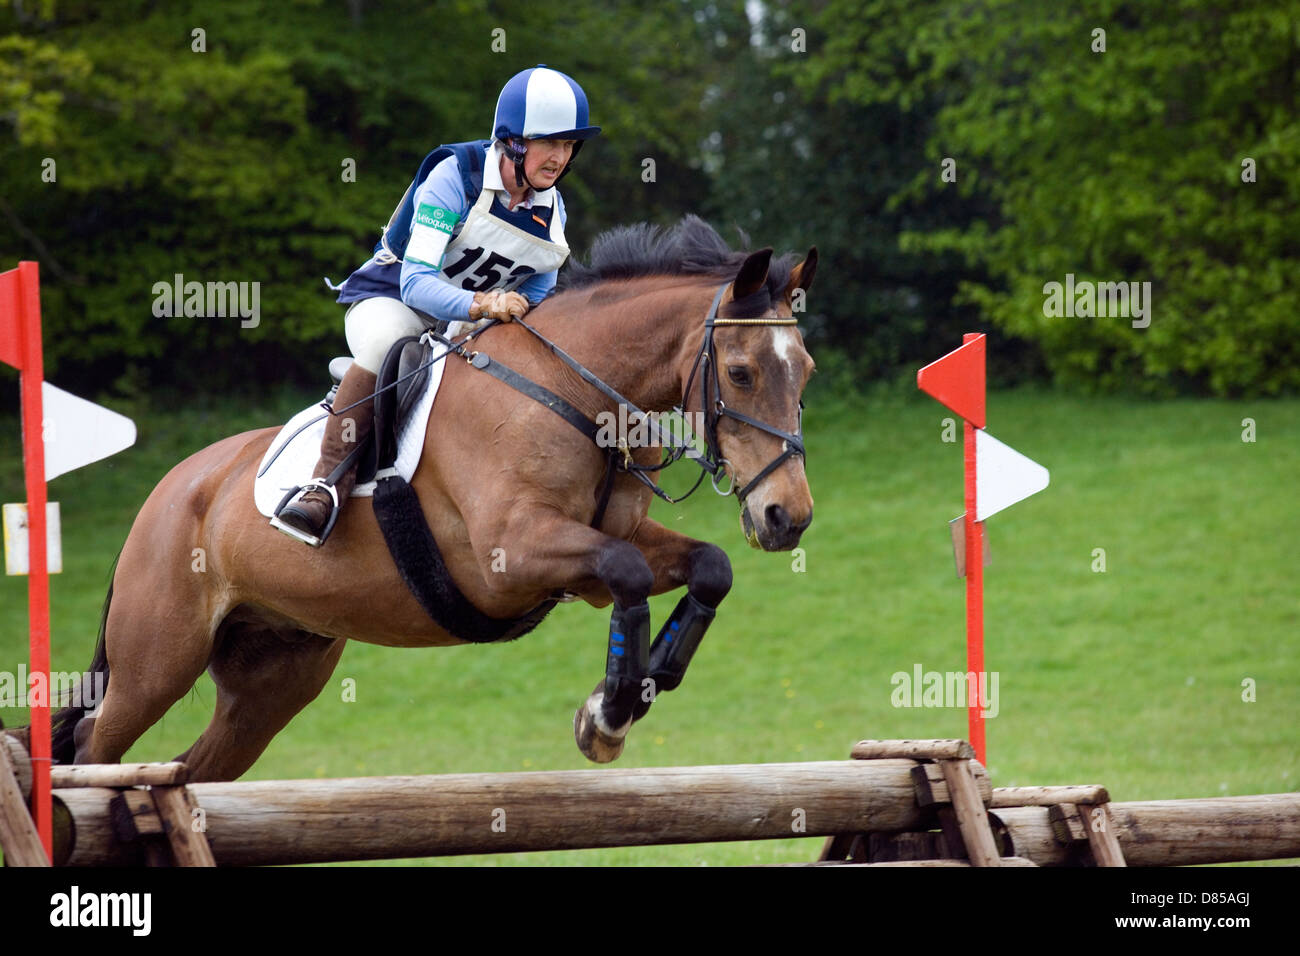 Hampshire : Equestrian event cross-country Banque D'Images